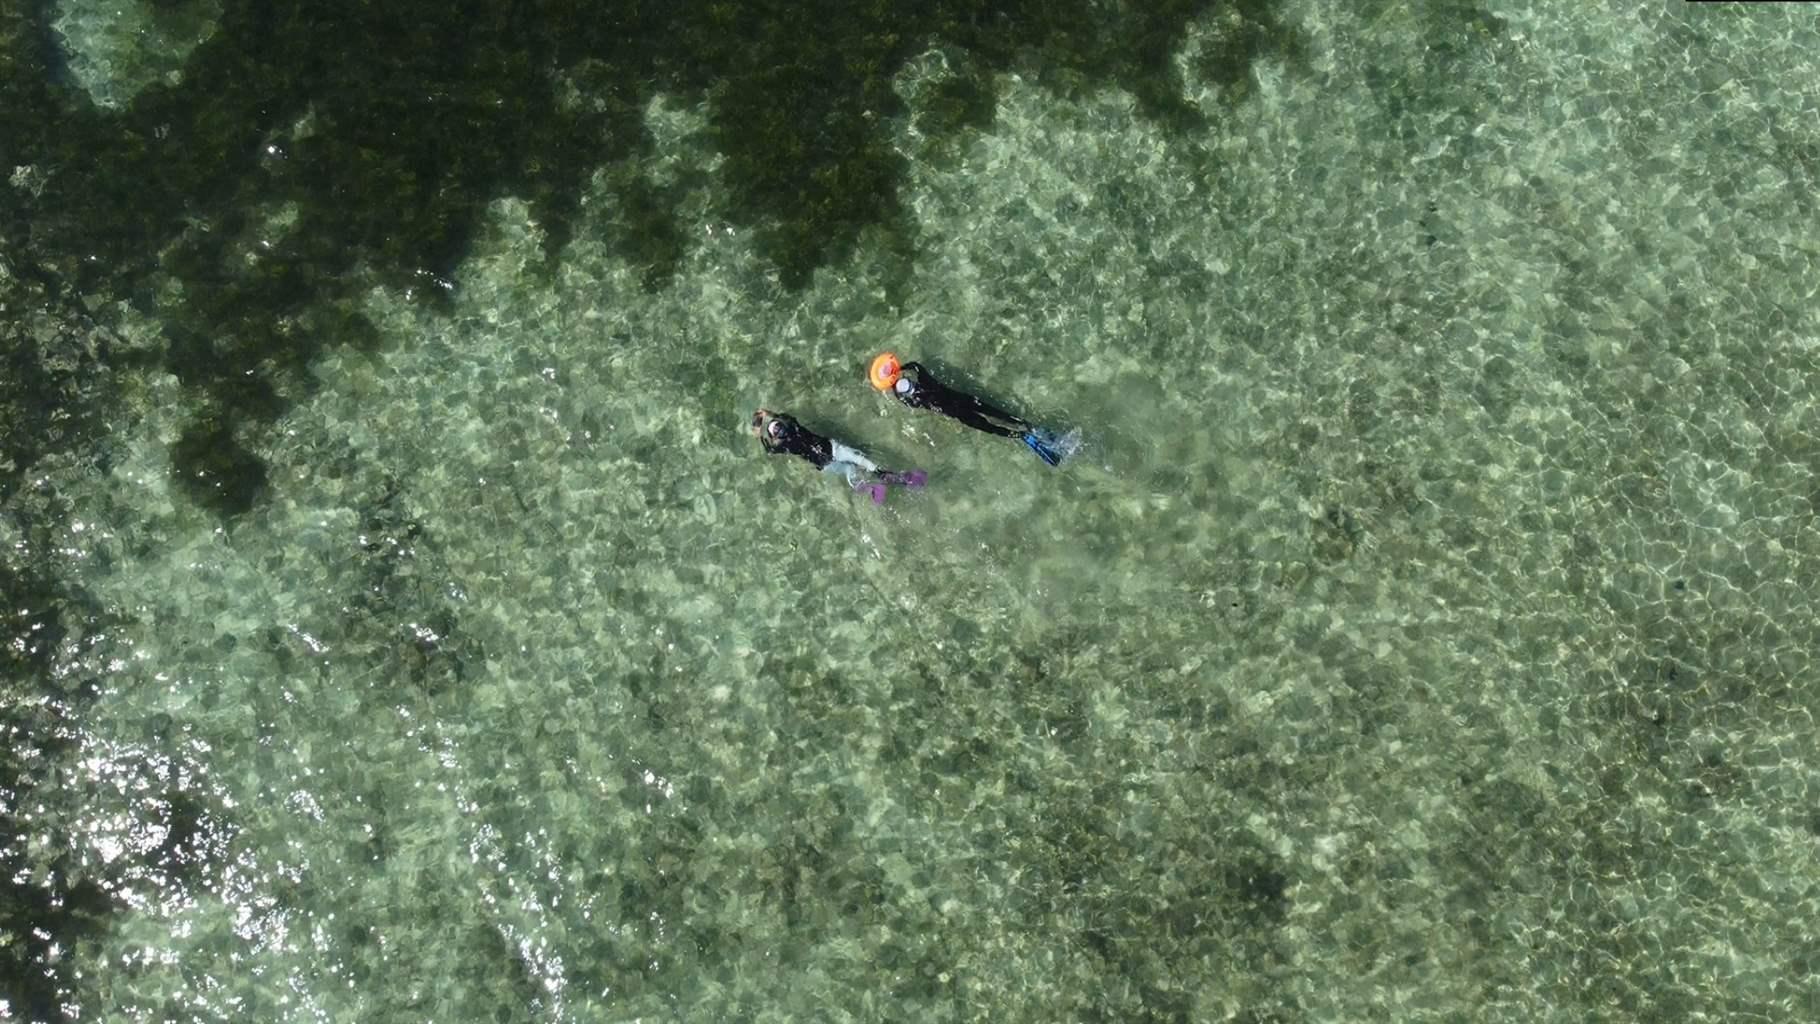 Two snorkelers, seen from directly overhead, glide through clear water over a pale-green ocean floor toward a dark-green patch of underwater vegetation.  